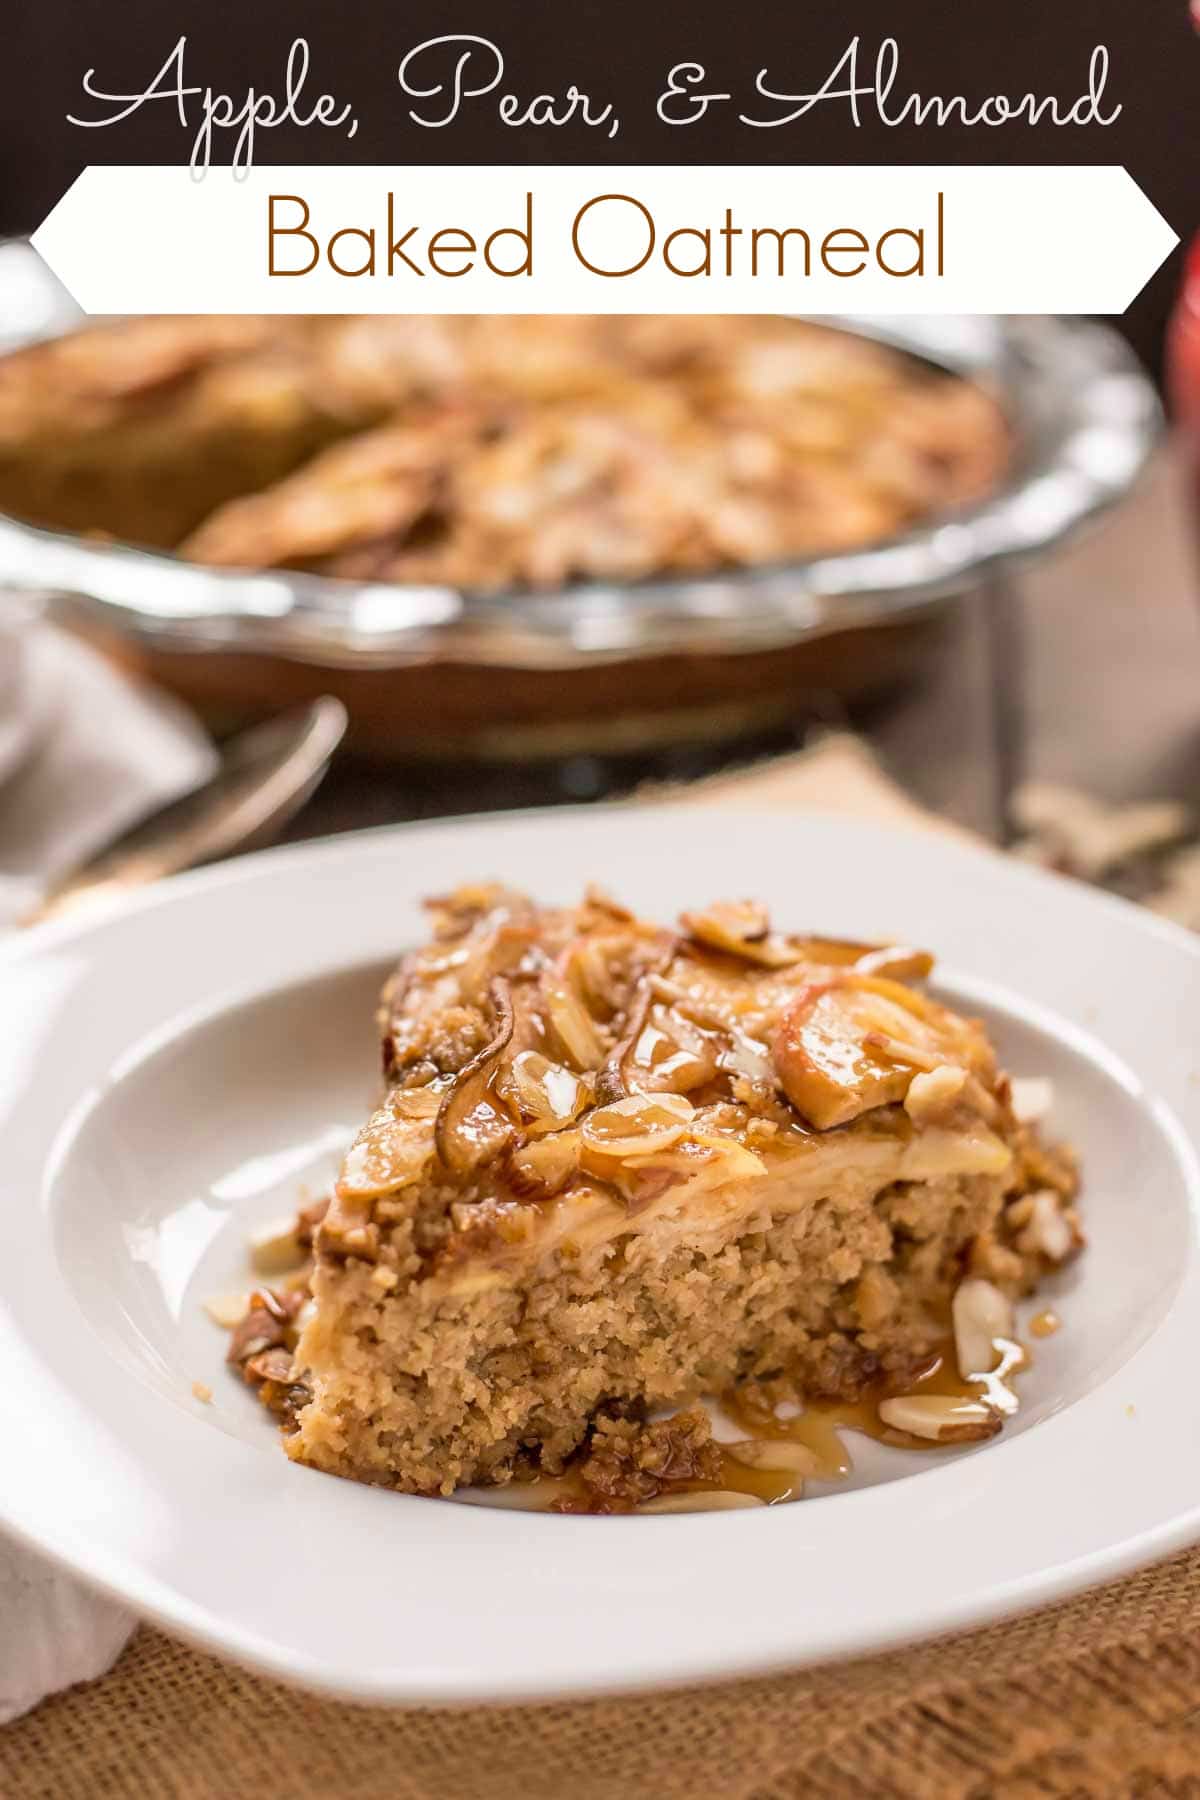 This Amish style Baked Oatmeal is topped with apples, pears, and almonds for a hearty breakfast treat.